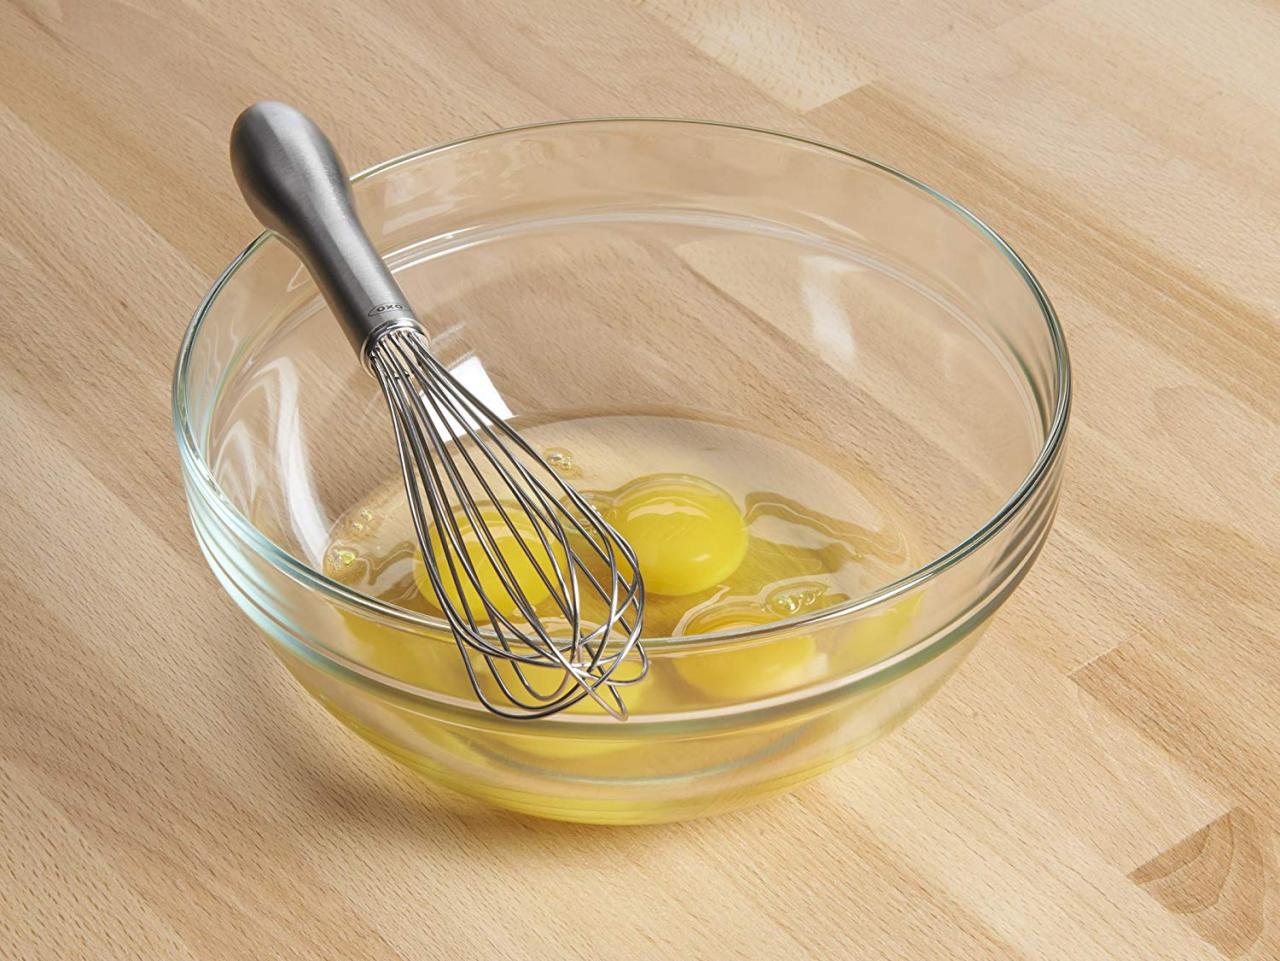 3 PC STAINLESS STEEL BALLOON WIRE WHISK SET WHIP MIX STIR BEAT 8/10/12 inch